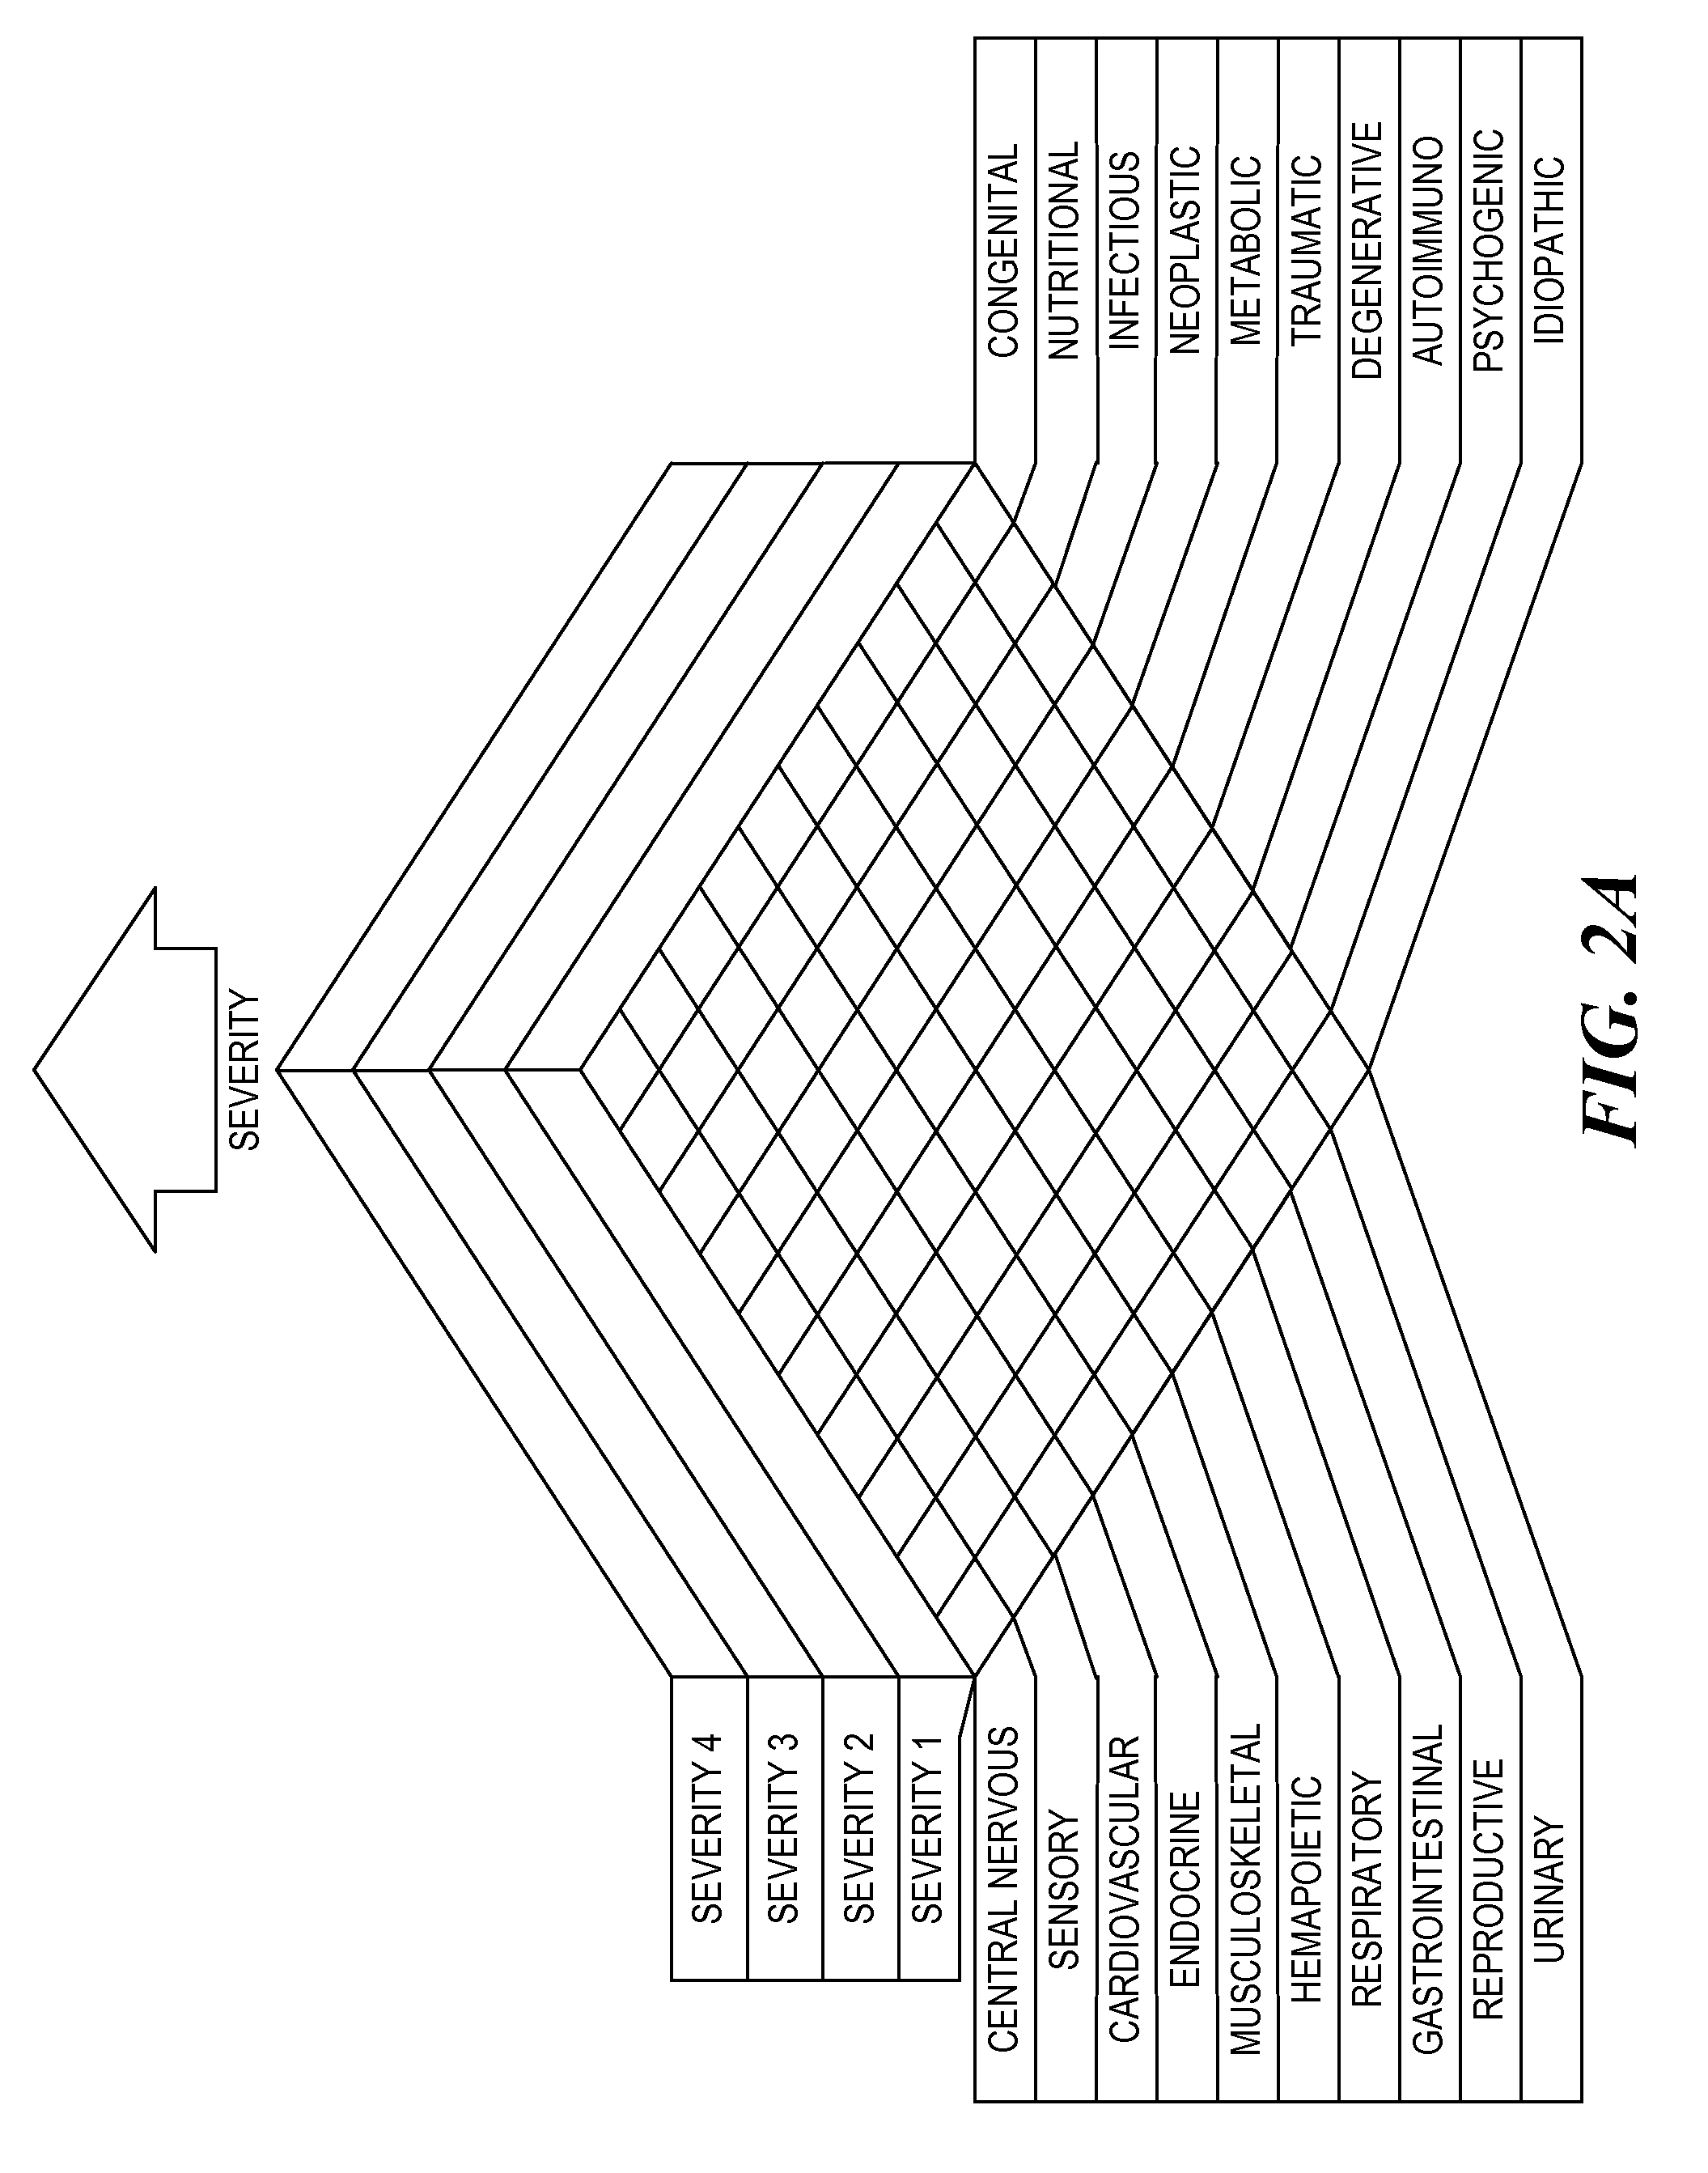 System and method for risk adjusted cost index measurements for health care providers